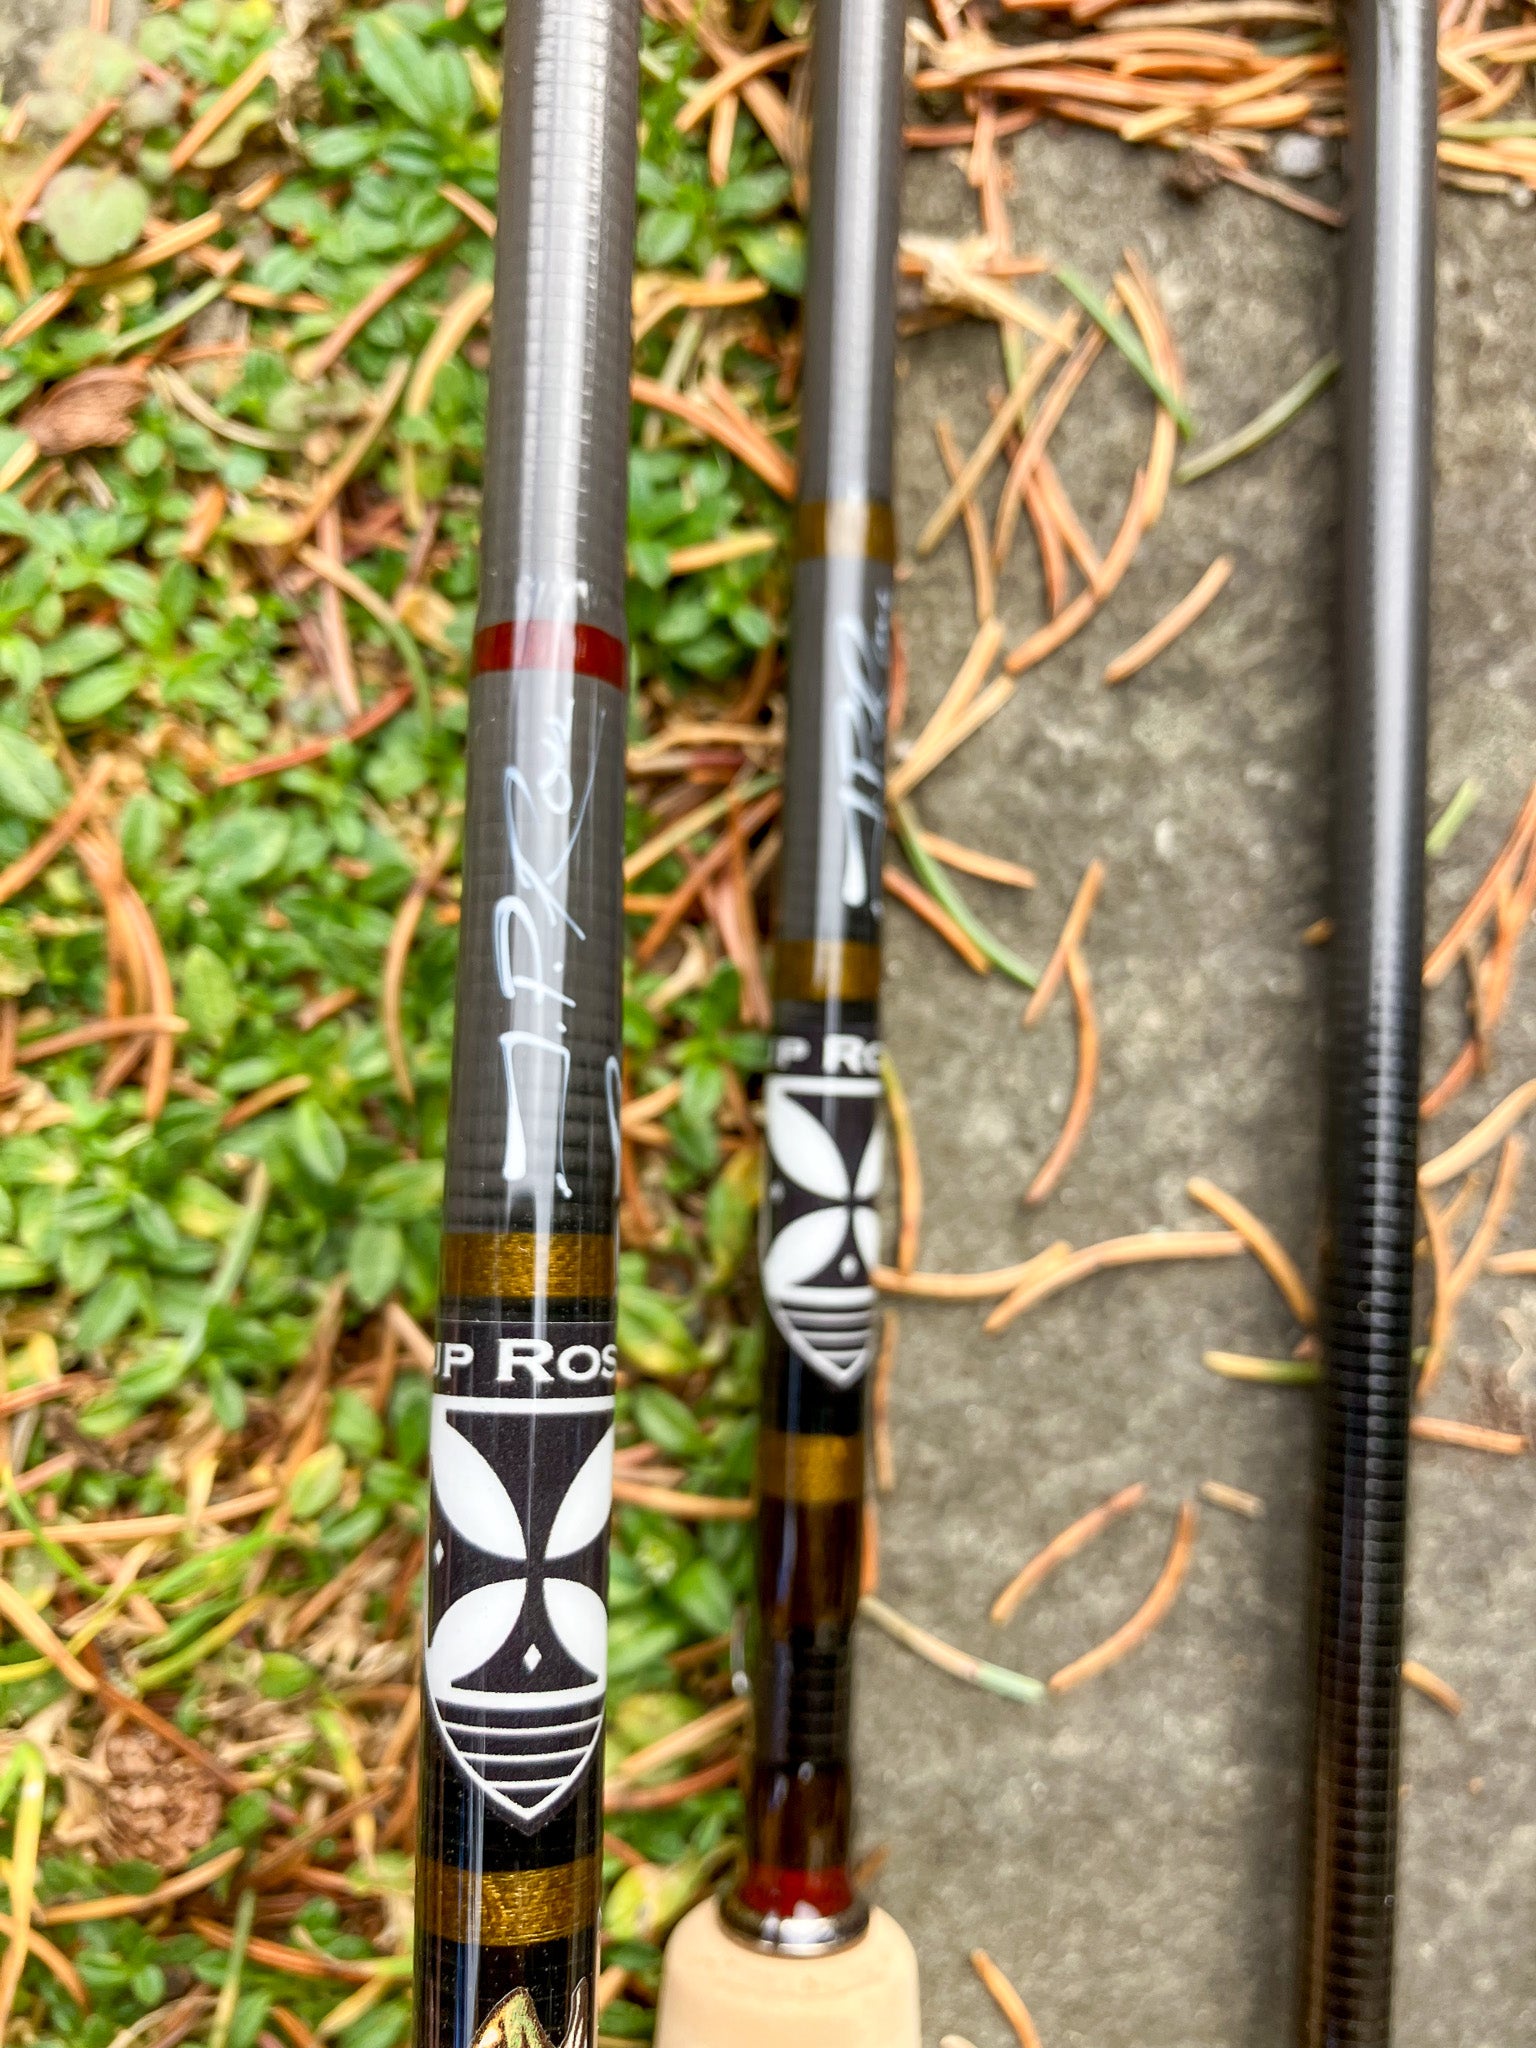 Peacemaker 10'6" 4 wt. 4 pc. & 8'0" 3-4 wt. 3 pc. 2 rods in one. Choose options below.